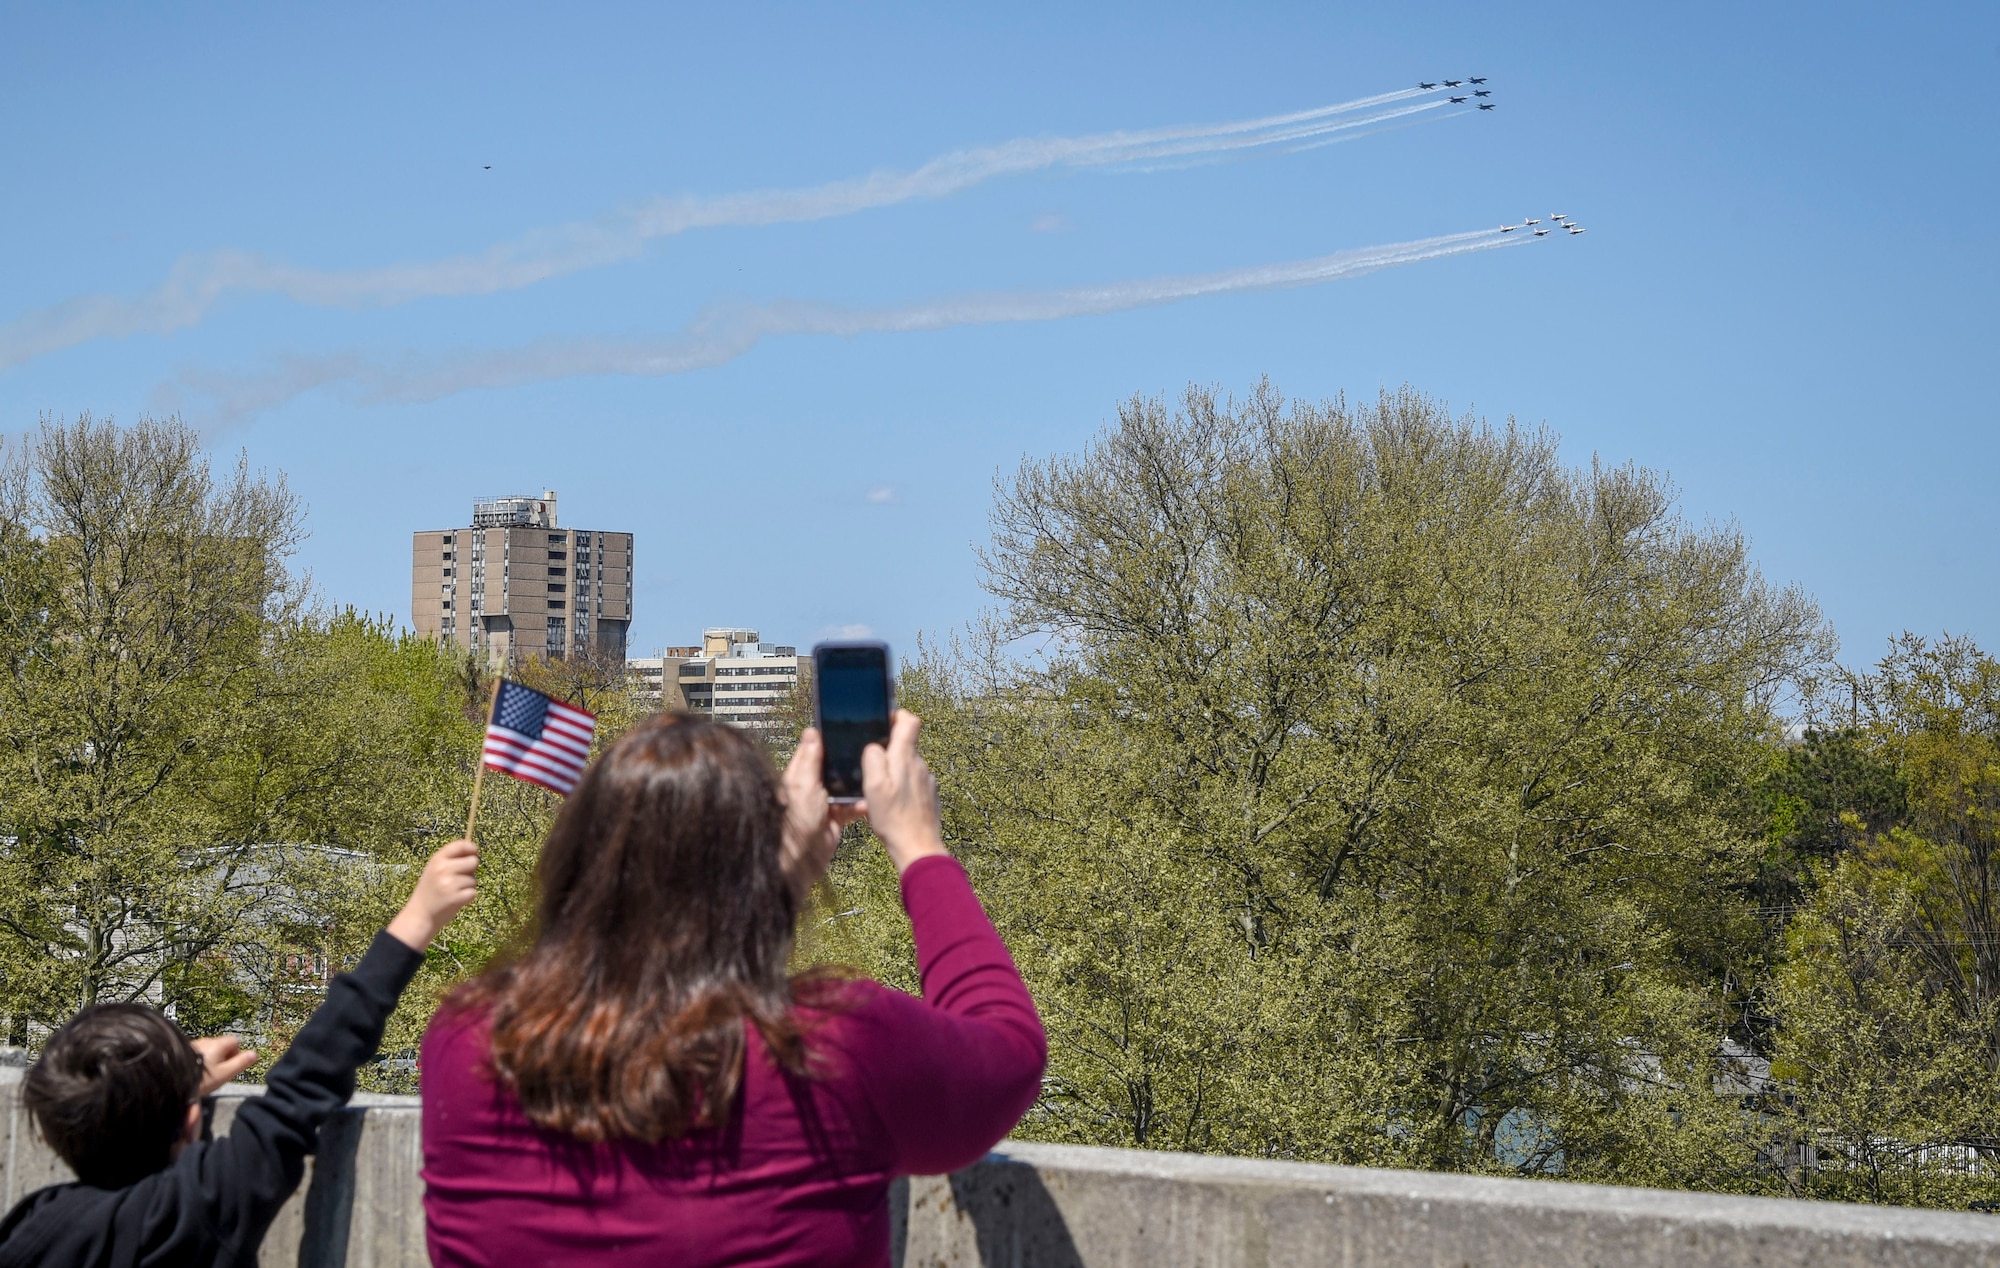 A family watches the U.S. Air Force Demonstration Squadron, the Thunderbirds, and the U.S. Navy Flight Demonstration Squadron, the Blue Angels, during the America Strong flyover at Trenton, New Jersey, April 28, 2020. America Strong is a collaborative salute from the U.S. Air Force and U.S. Navy to recognize healthcare workers, first responders, and other essential personnel while standing in solidarity with all Americans during the COVID-19 pandemic. (U.S. Air Force photo by Tech. Sgt. AJ Hyatt)